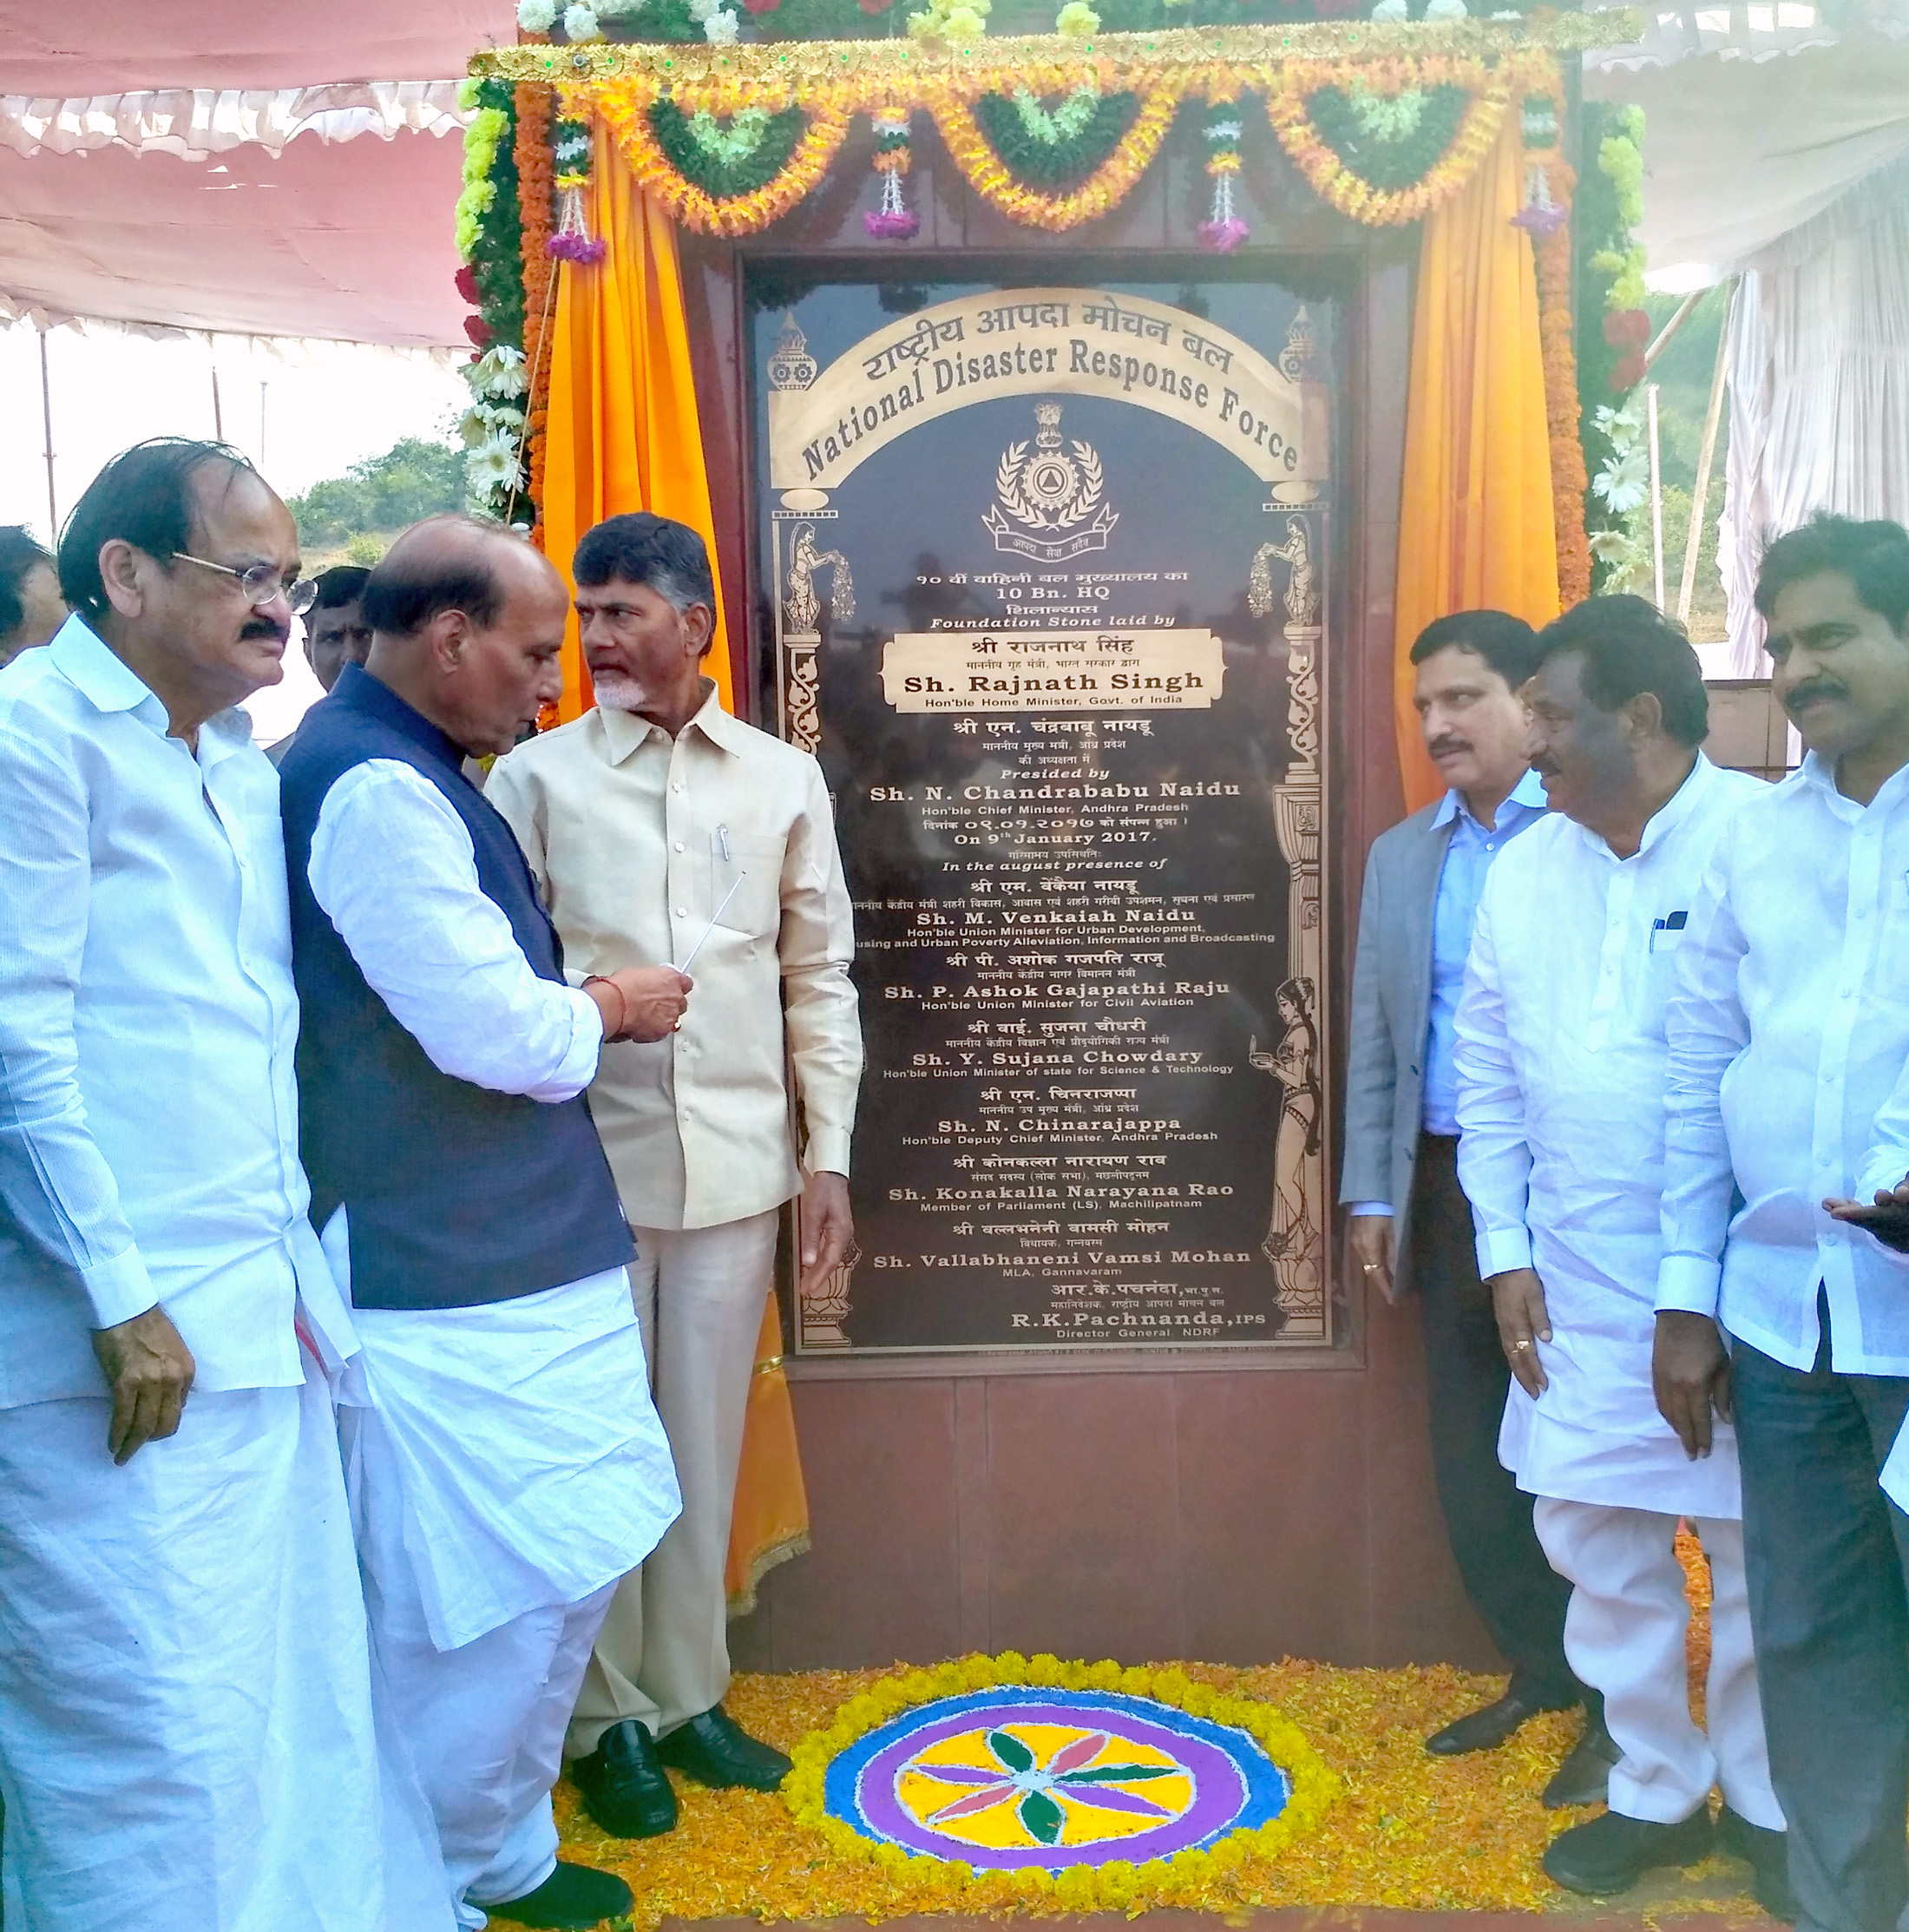 The Union Home Minister, Shri Rajnath Singh laying the foundation stone of the complex of 10 Bn. HQ of the National Disaster Response Force (NDRF), in Vijayawada, Andhra Pradesh on January 09, 2017. 	The Union Minister for Urban Development, Housing & Urban Poverty Alleviation and Information & Broadcasting, Shri M. Venkaiah Naidu and The Chief Minister of Andhra Pradesh, Shri N. Chandra Babu Naidu are also seen.